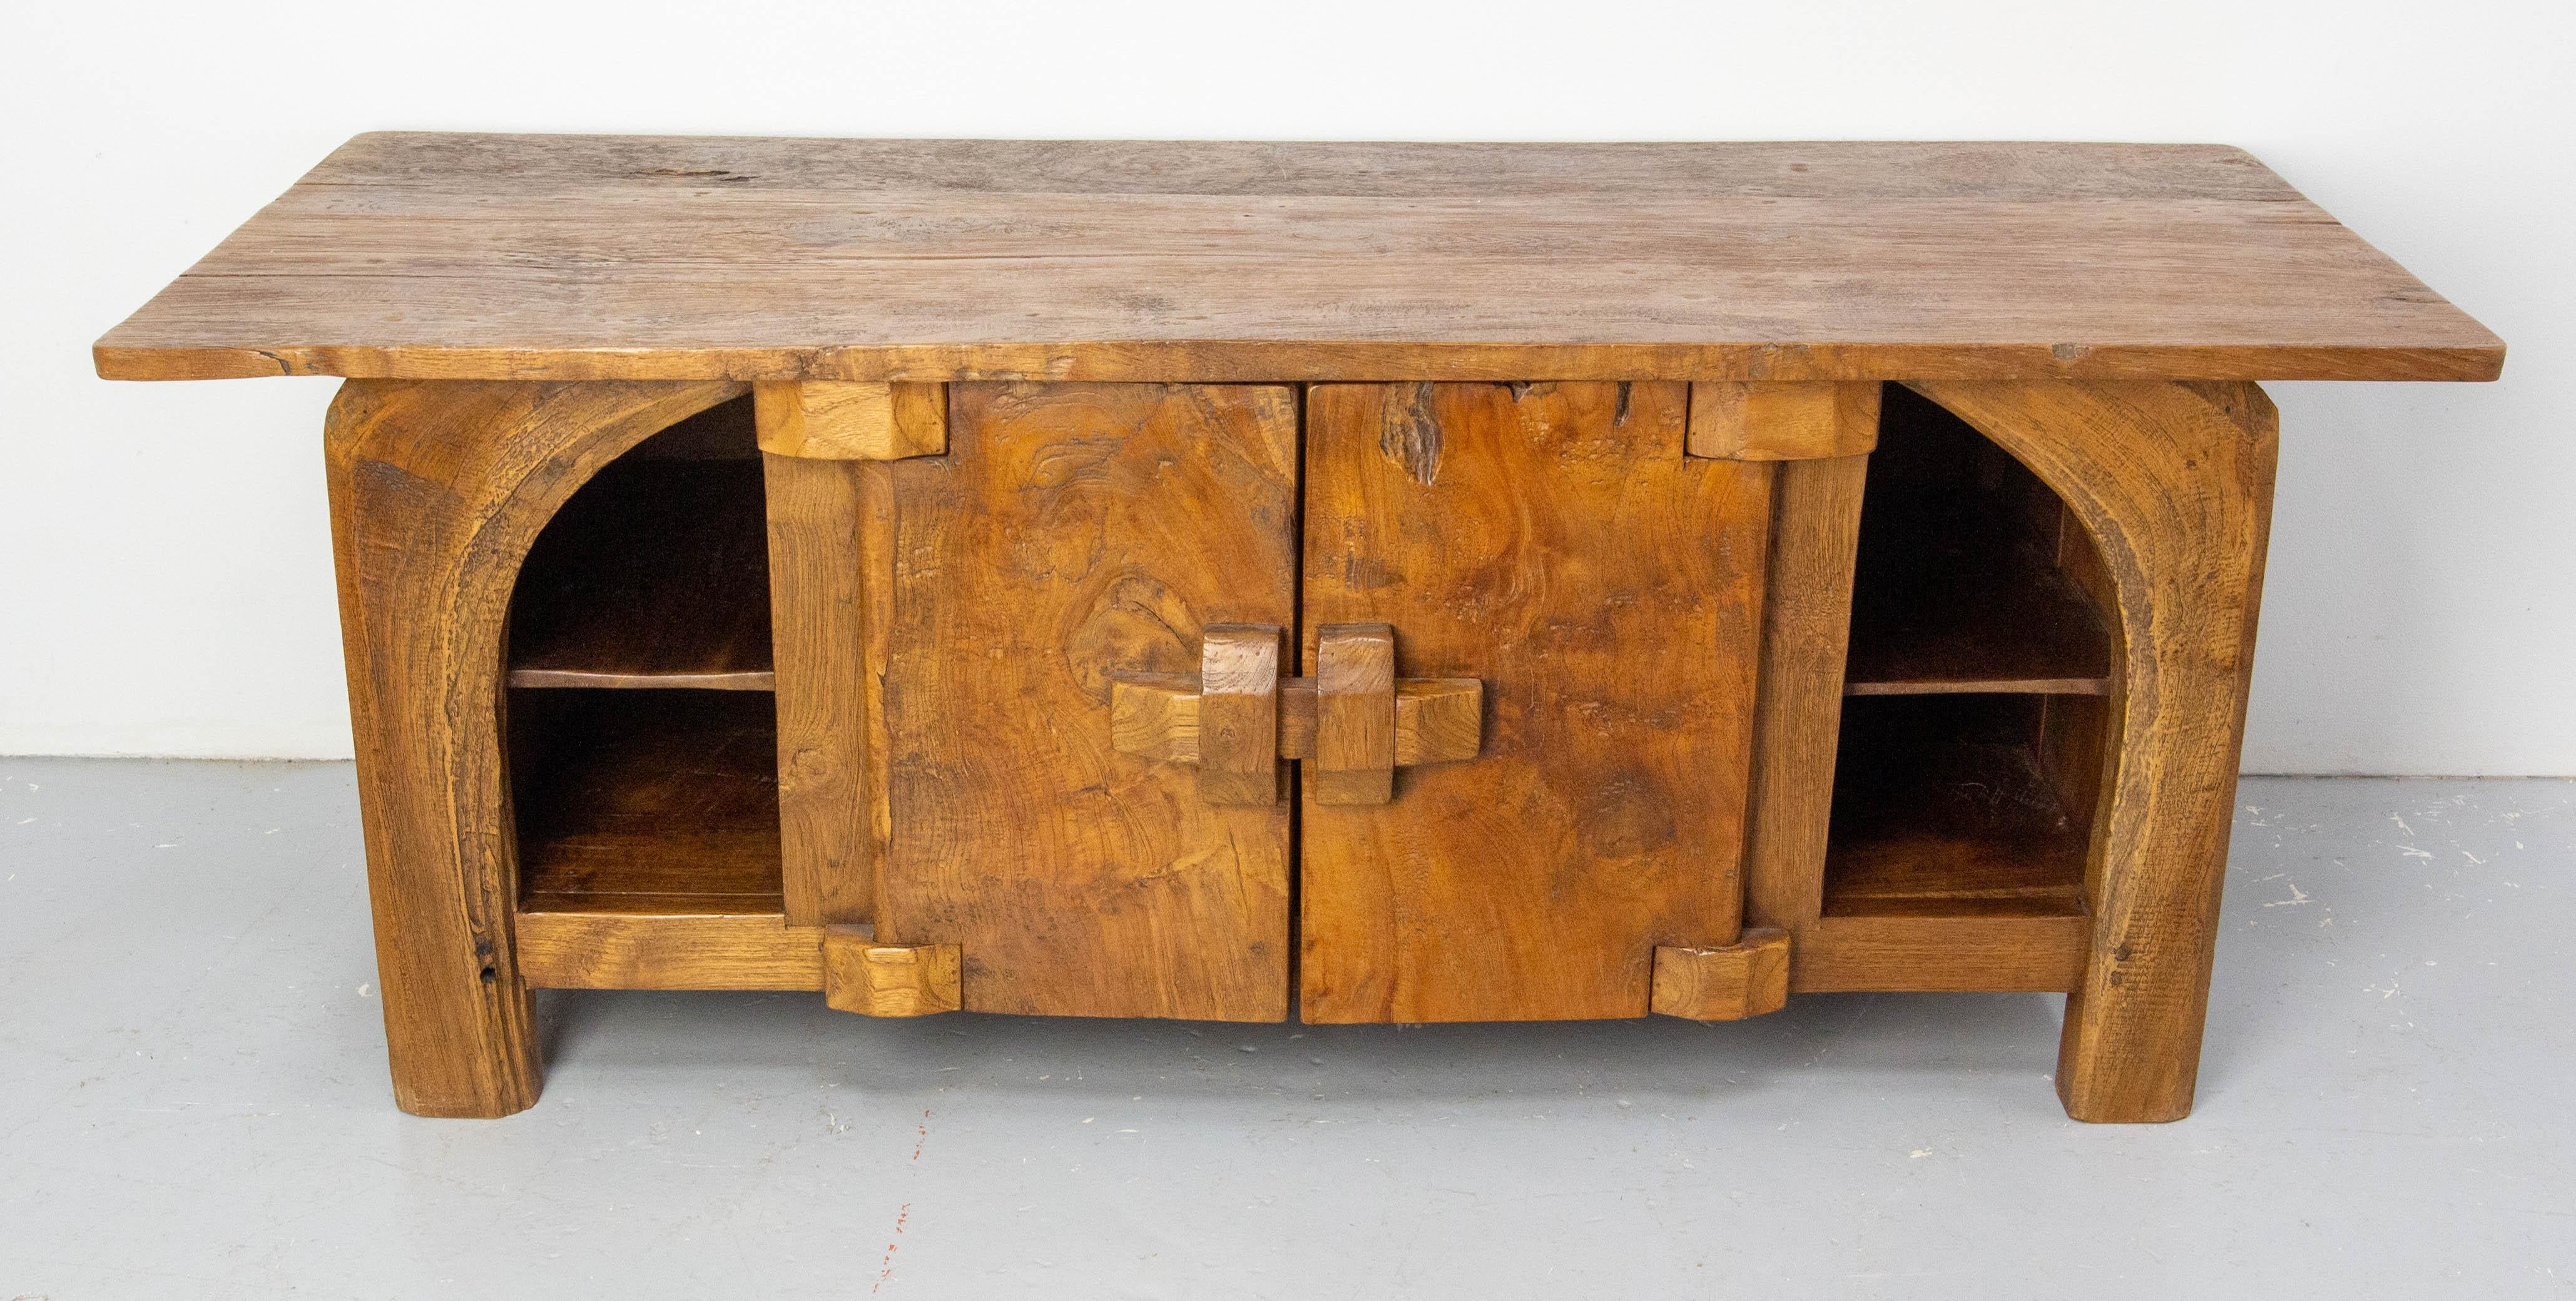 Entry, hall way or bed end low cabinet, made circa 1990
The brutalist style of the cabinet allows to see the wood in its original material
It also can be used as a TV stand.
Good condition.

Shipping :
P 50.5 L 126 H 47 cm 30 kg.